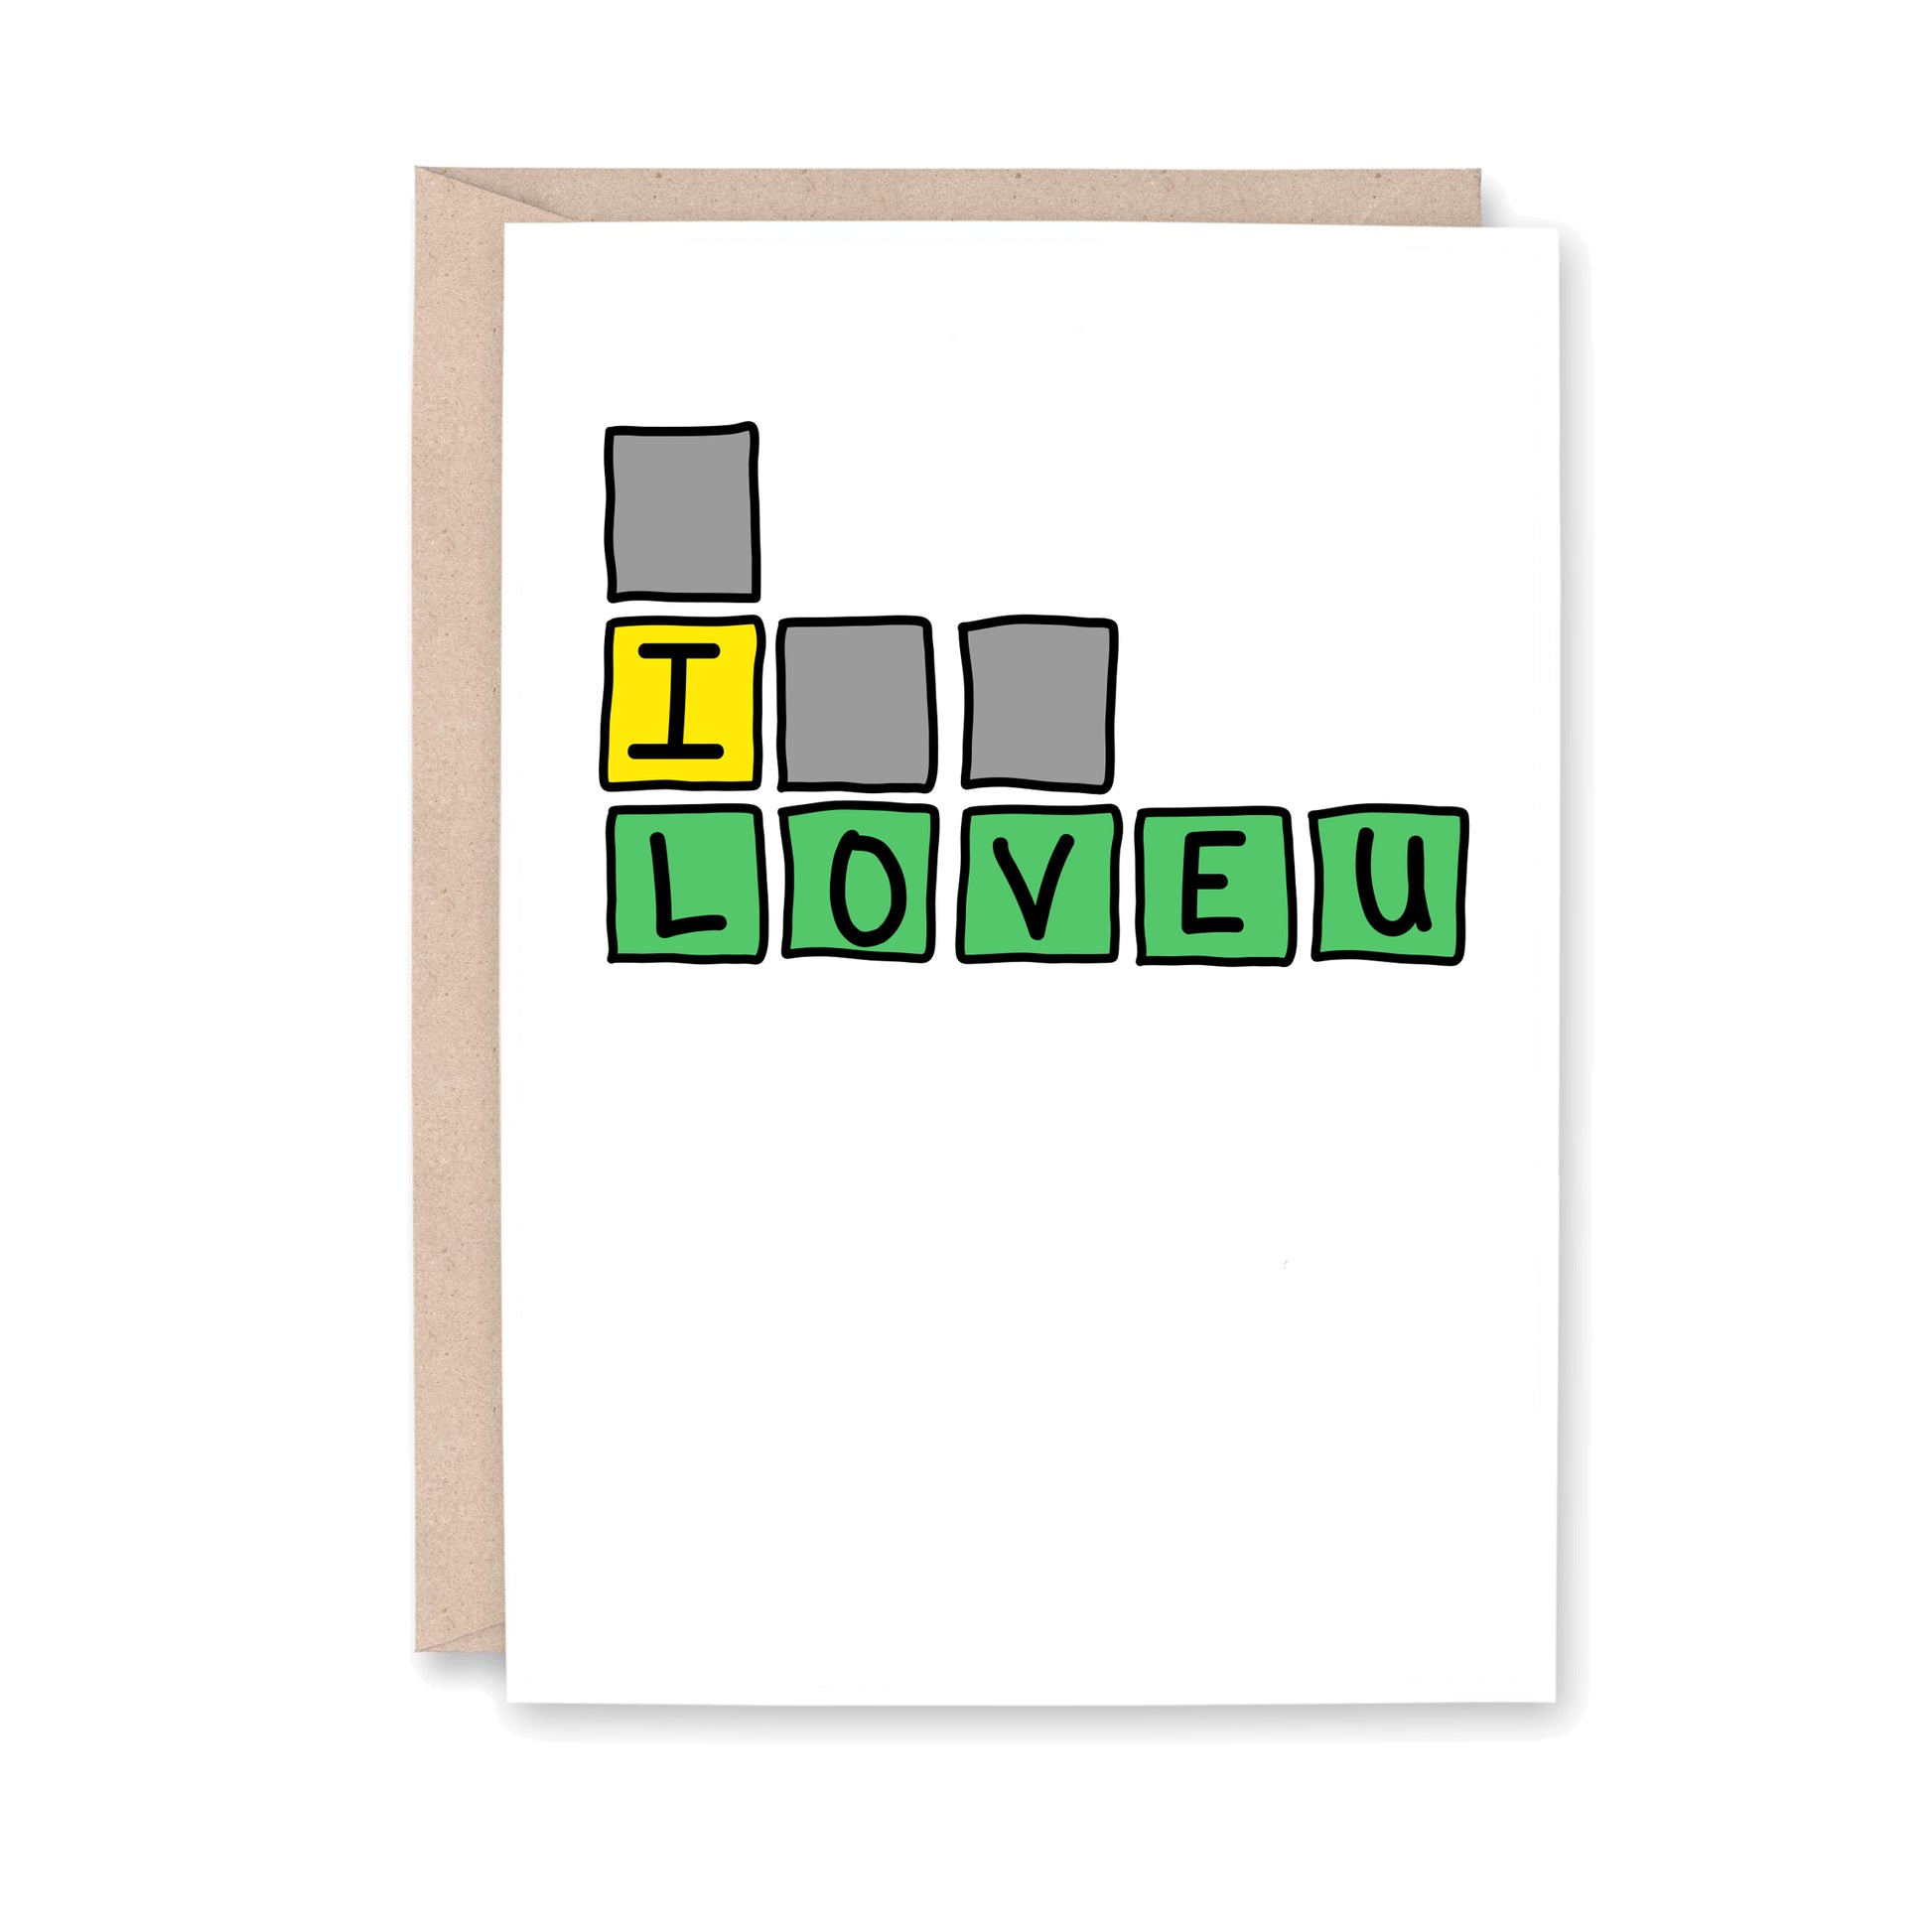 Greeting card with gray, yellow and green Wordle block that says "I LOVE U"